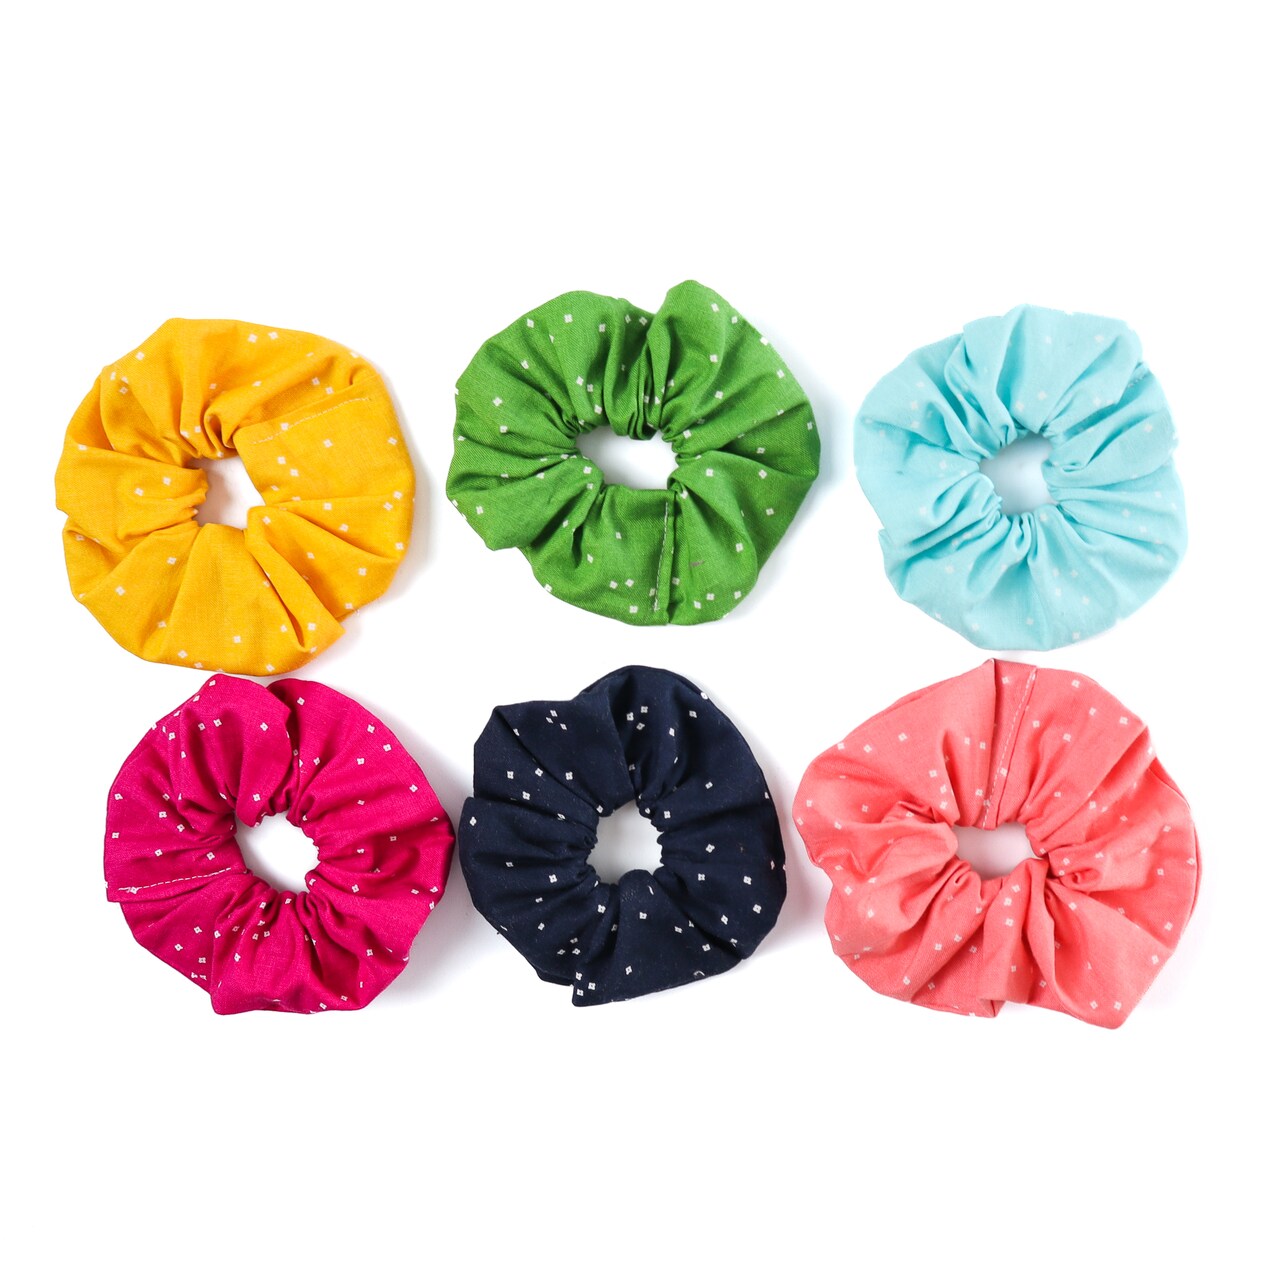 Scrunchie Beginner Sewing Kit - Blossom - Sewing Project Kit for